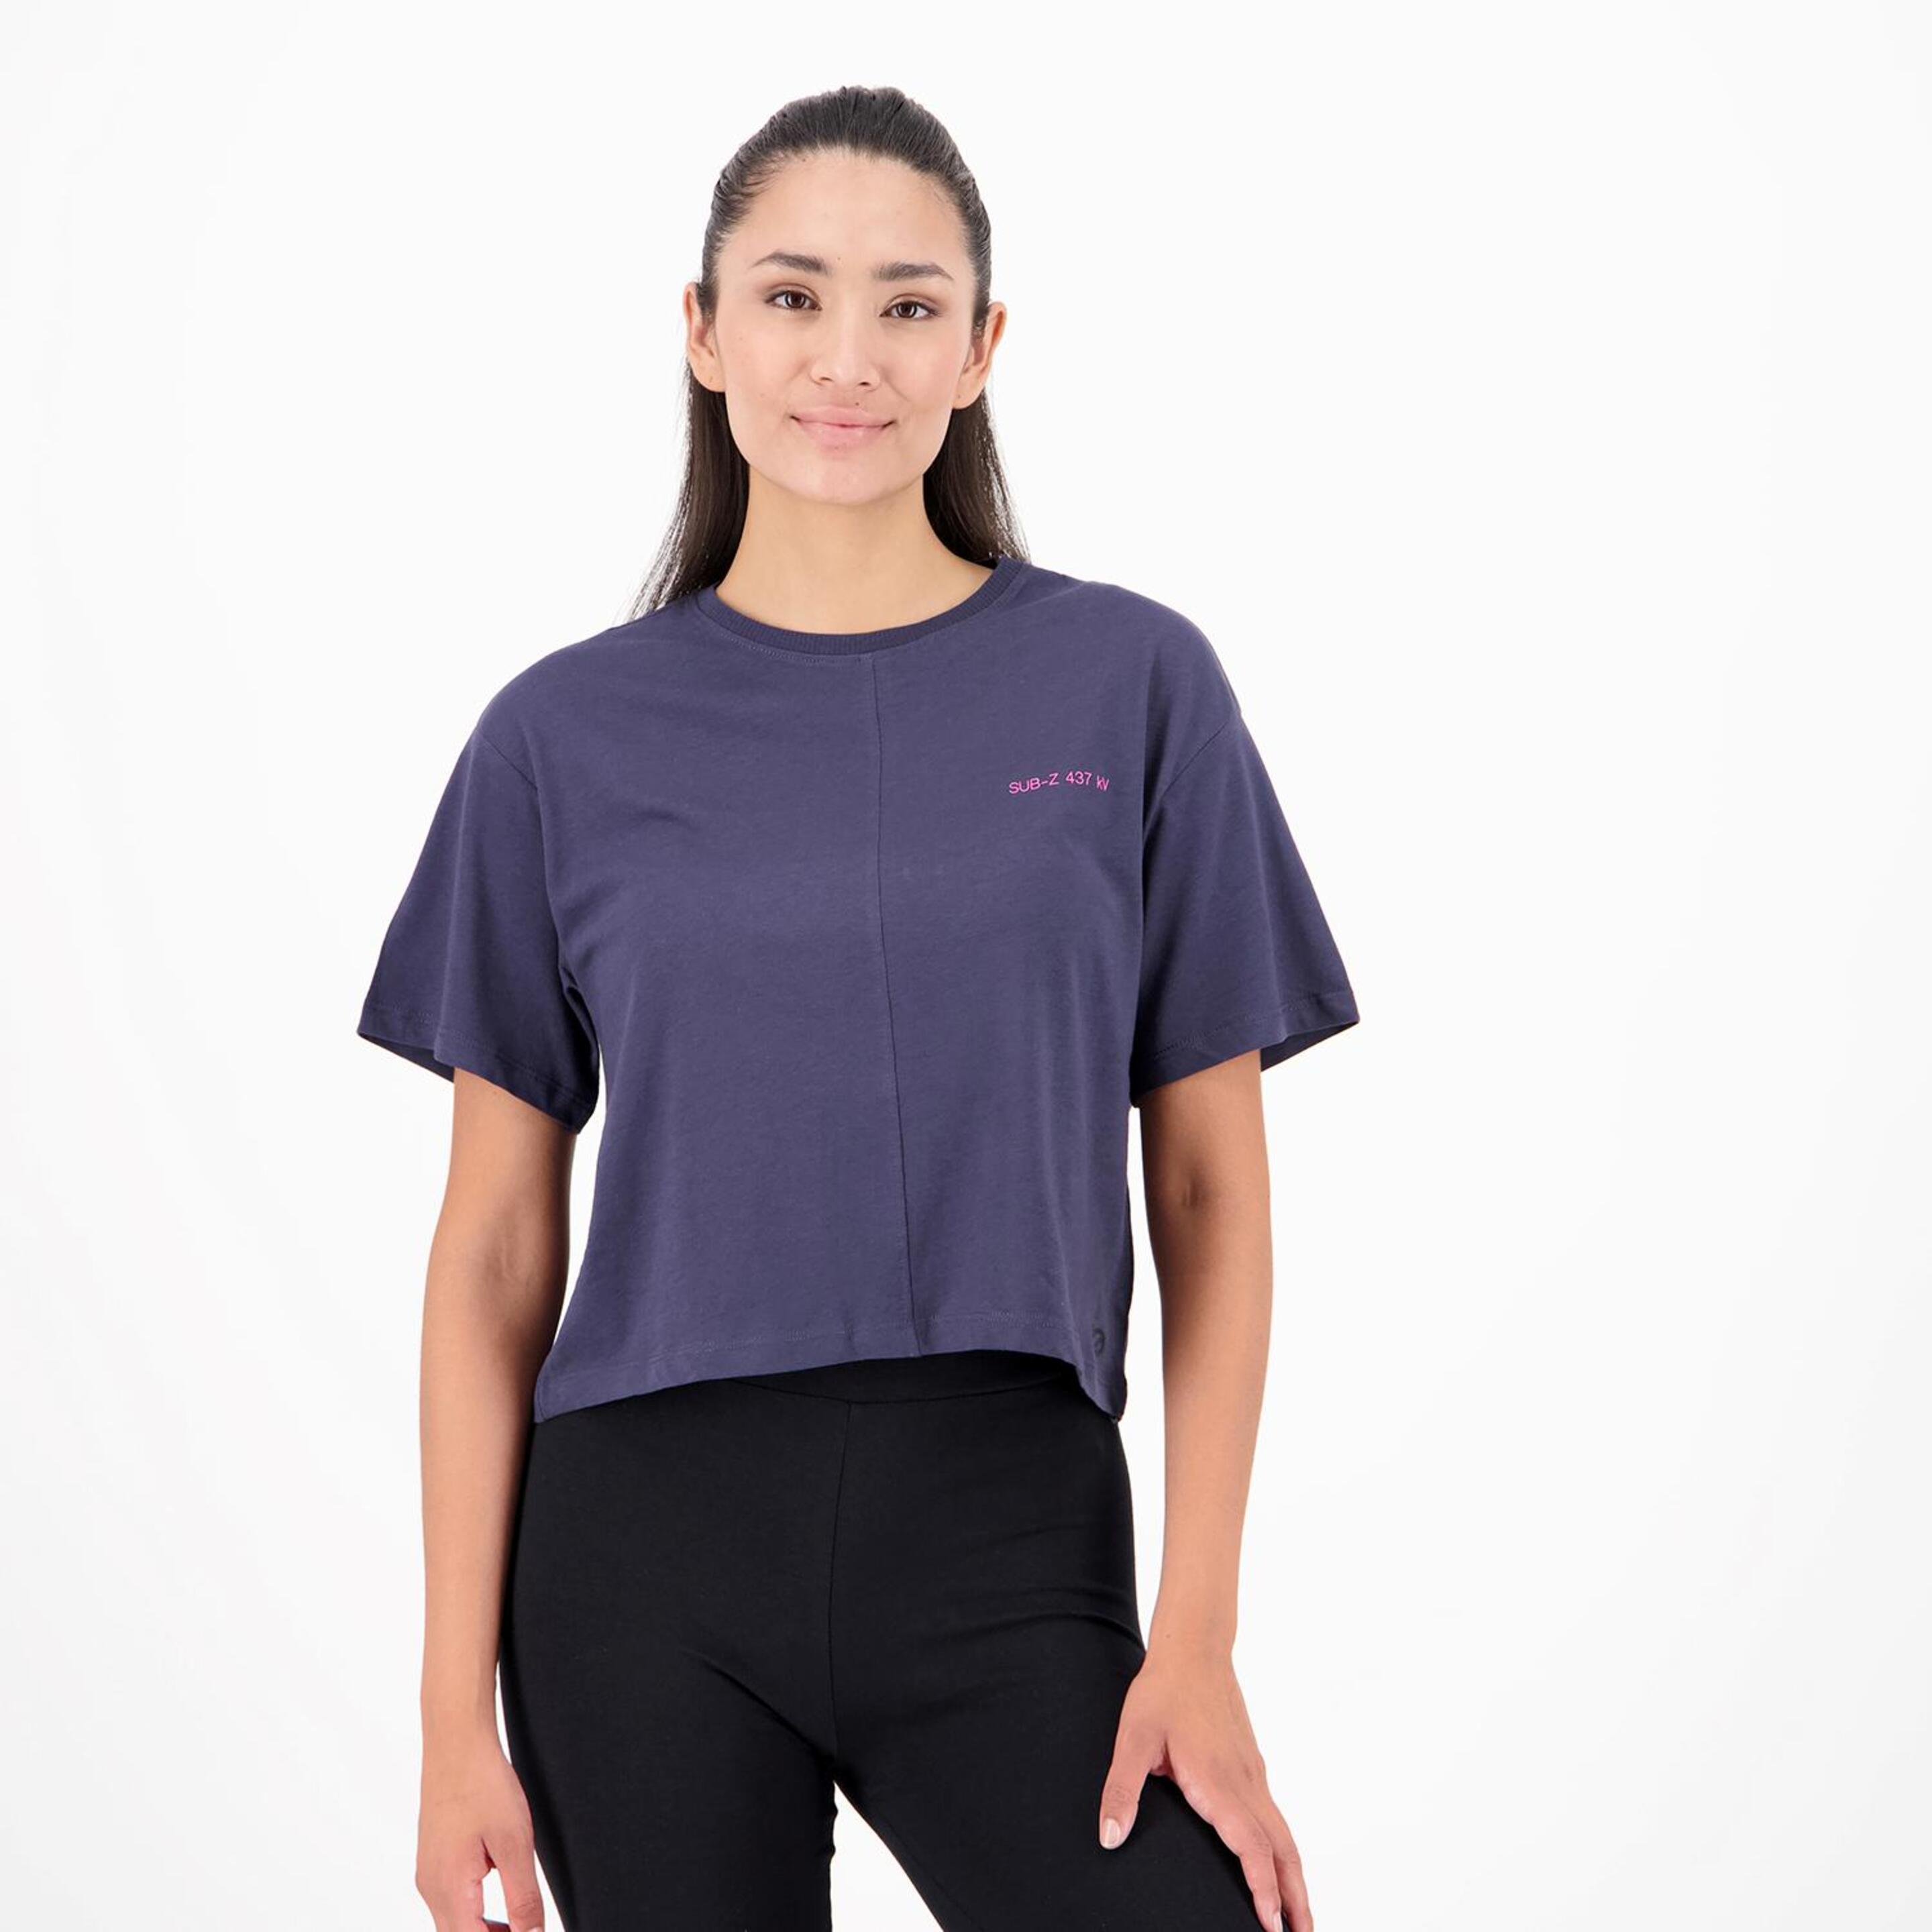 Silver Goneon - gris - Camiseta Mujer